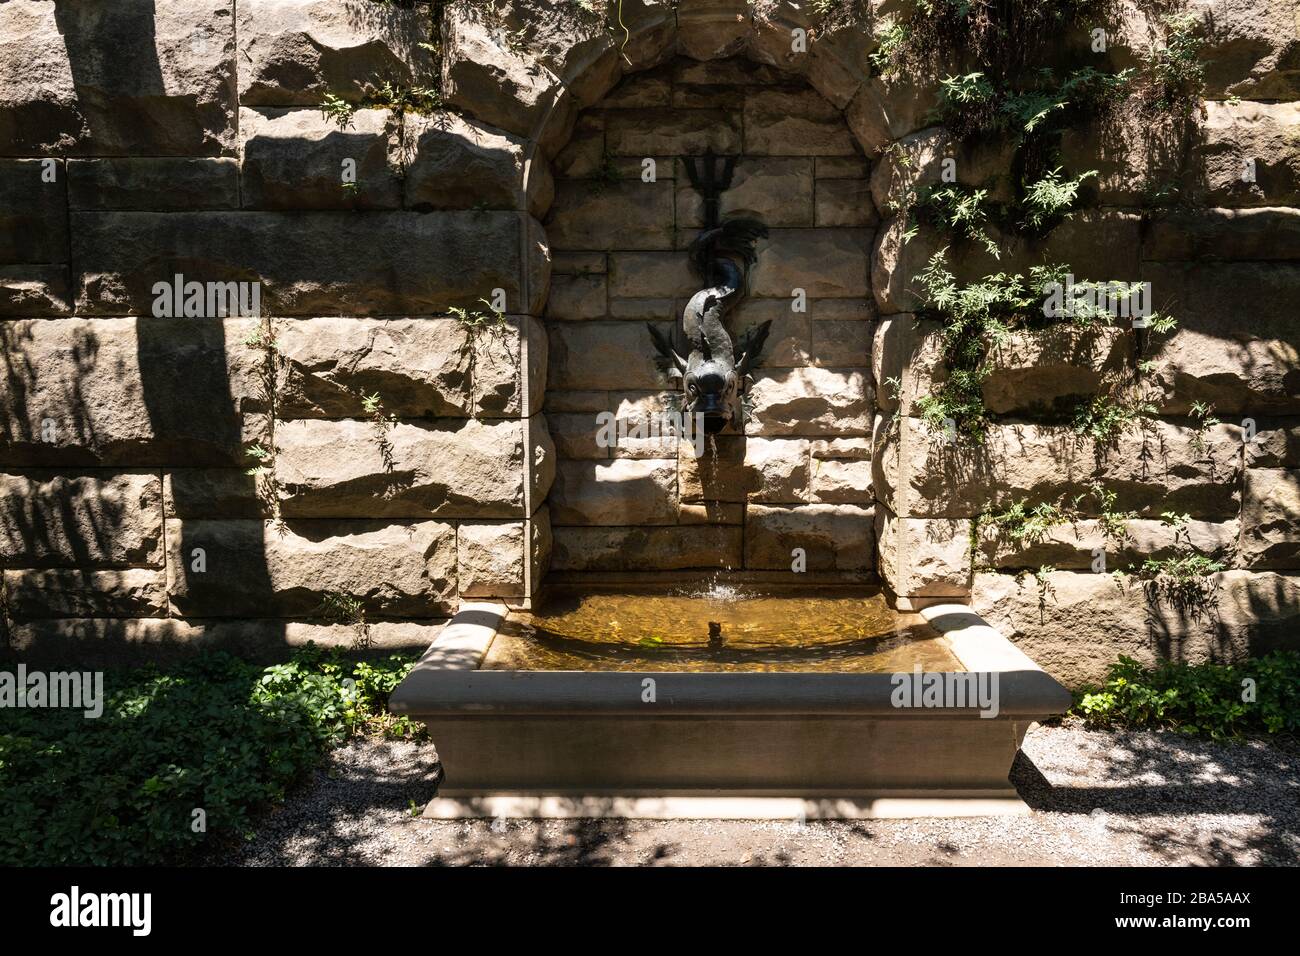 Asheville, North Carolina - July 24, 2019 - One of the many fountain statues in Biltmore gardens. Stock Photo